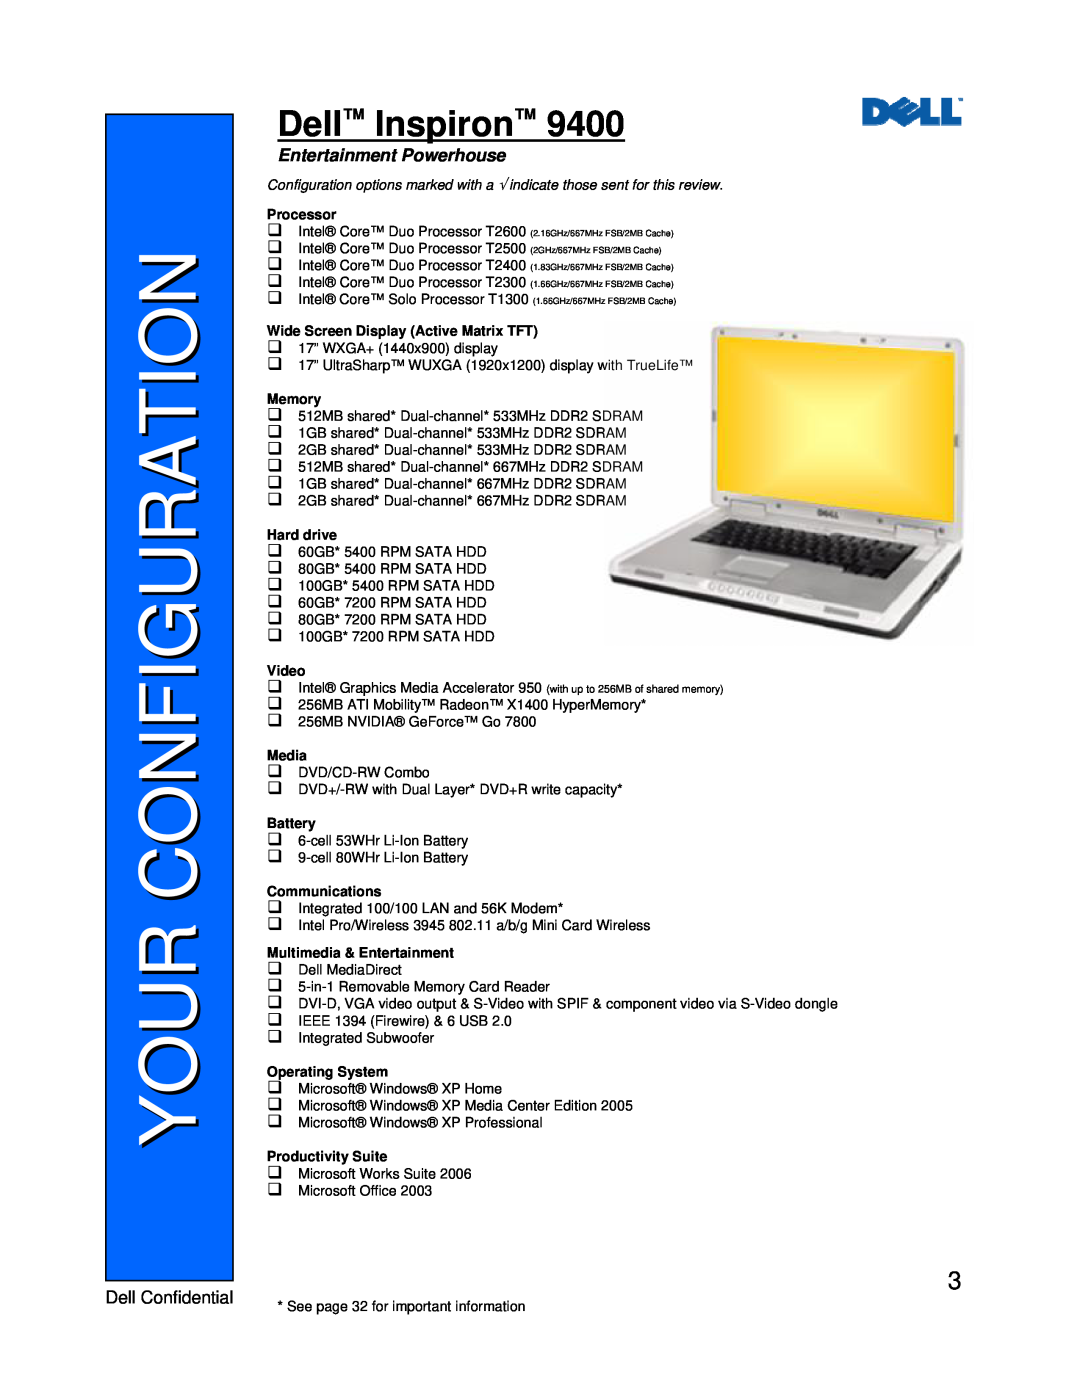 Dell 9400 manual Your Configuration, Dell Inspiron, Entertainment Powerhouse 